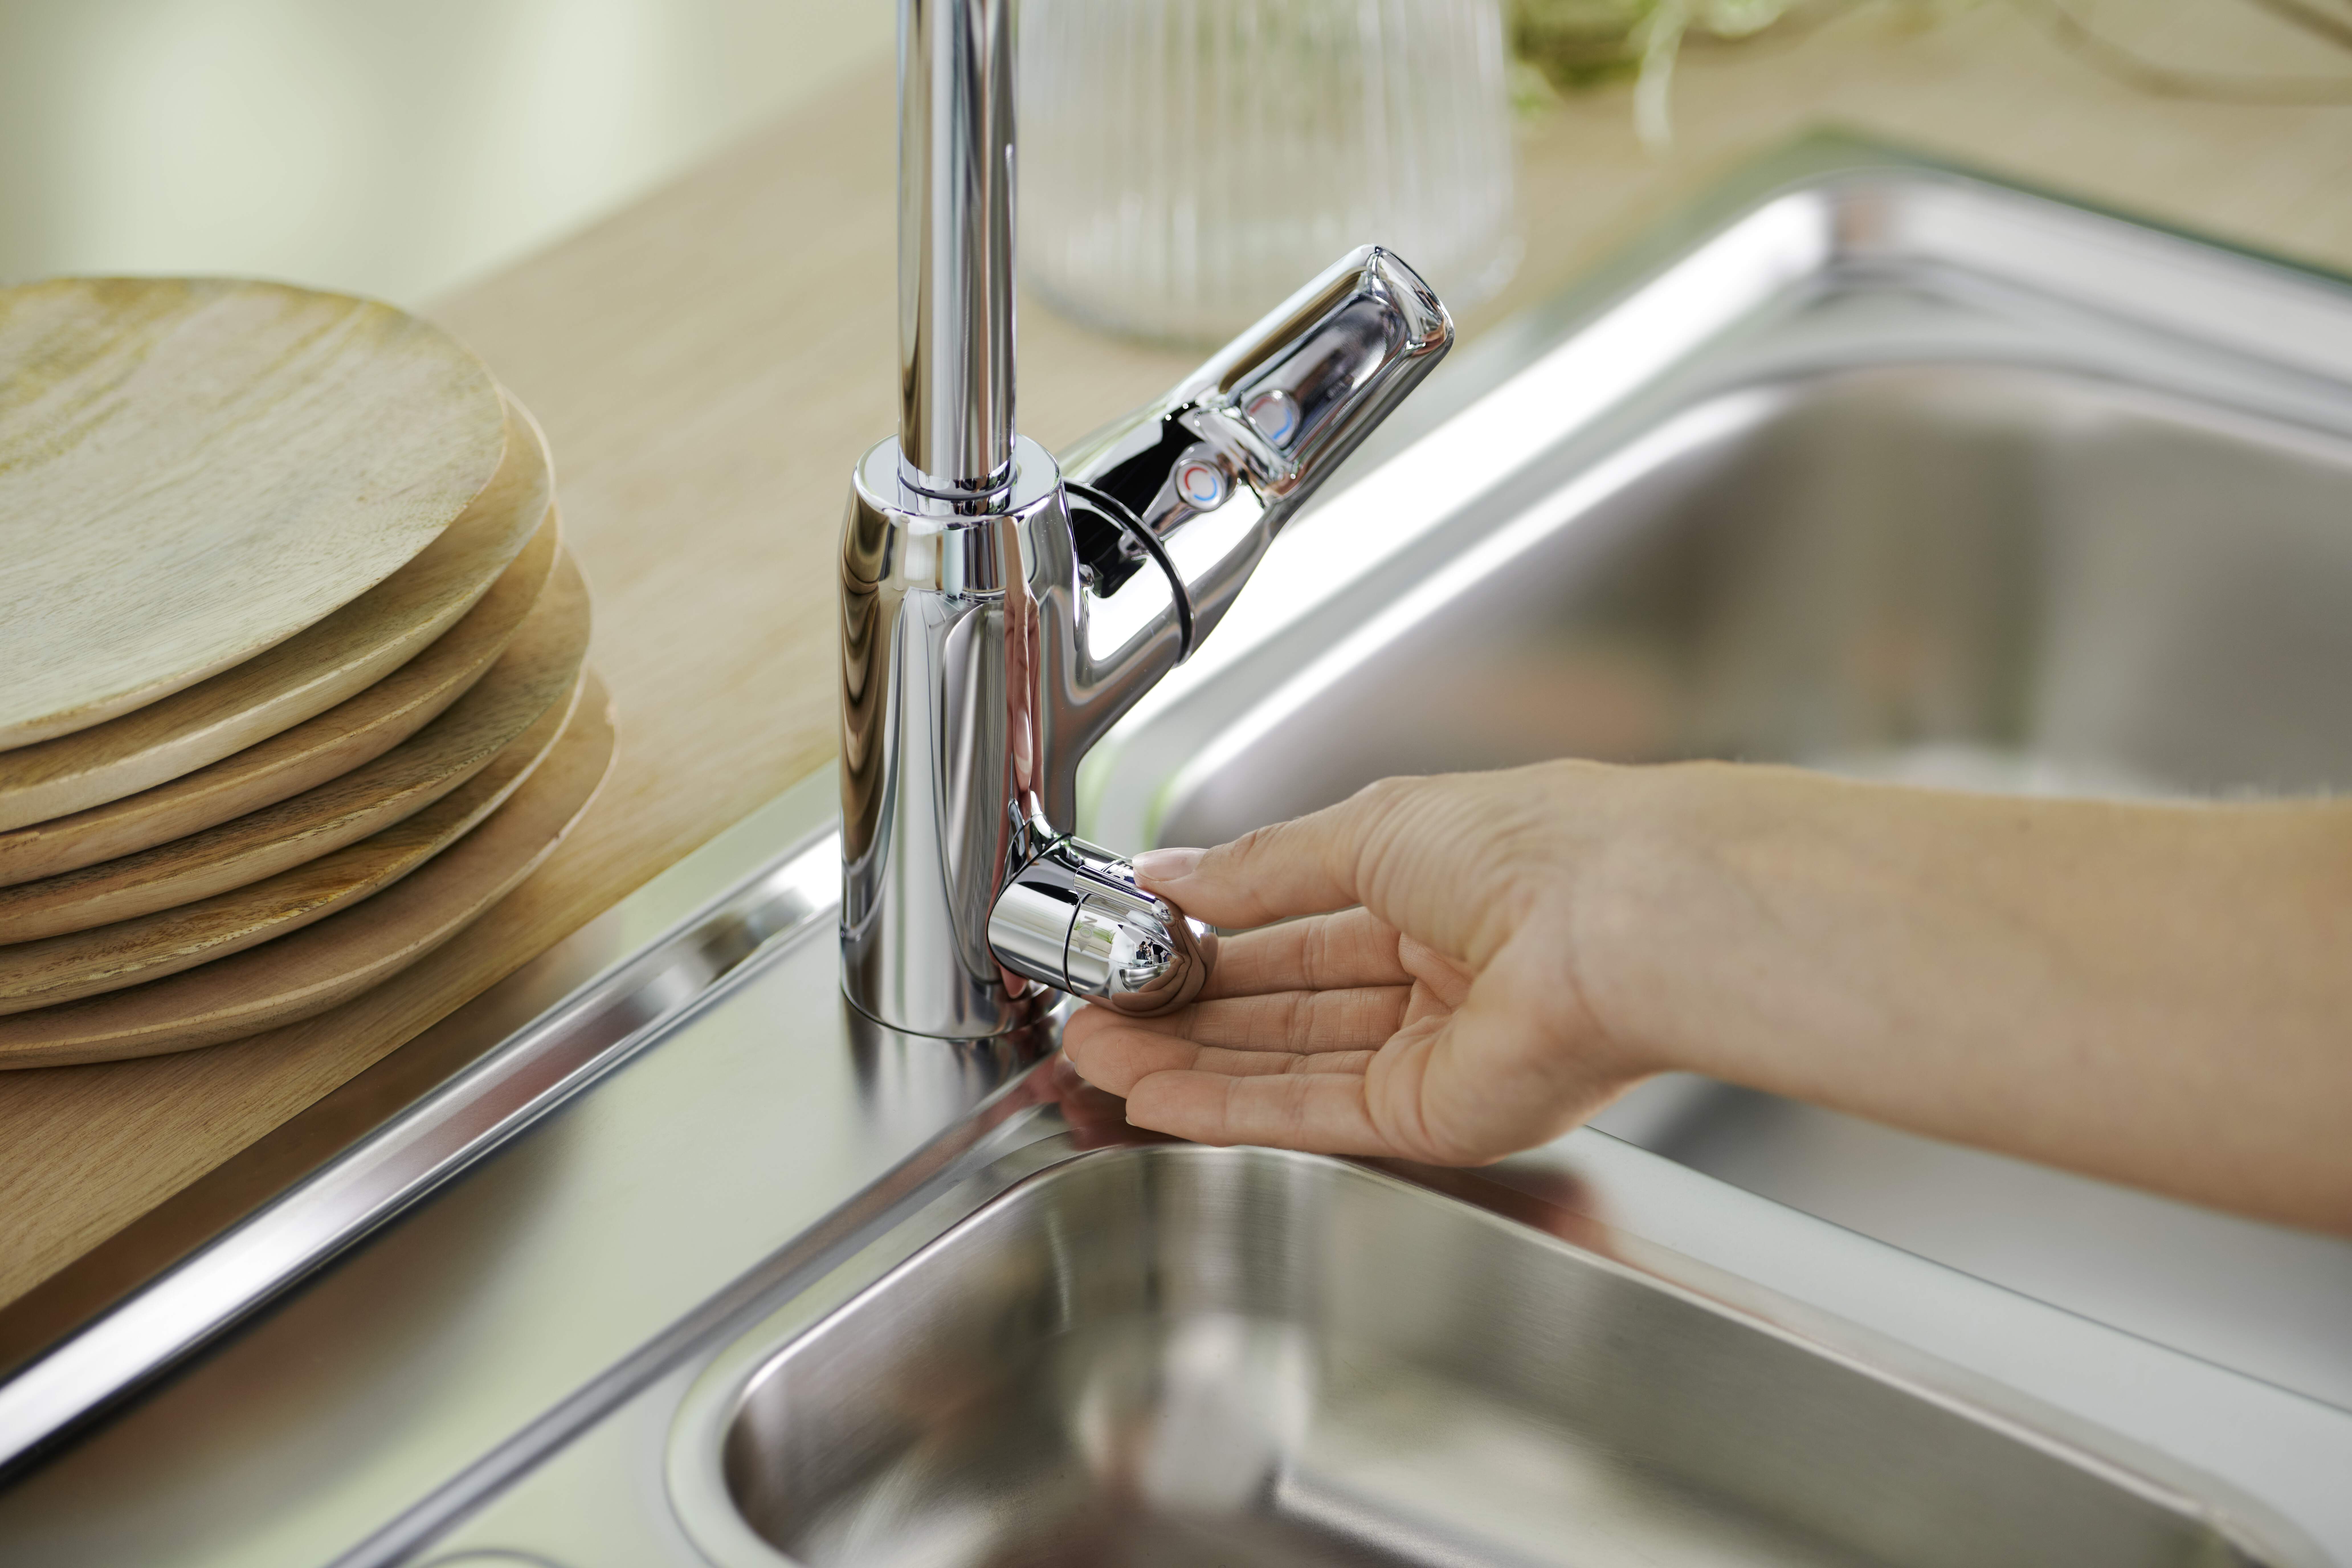 From mechanic switches to electronic shut-off valves – Here’s all you need to know about dishwasher valves